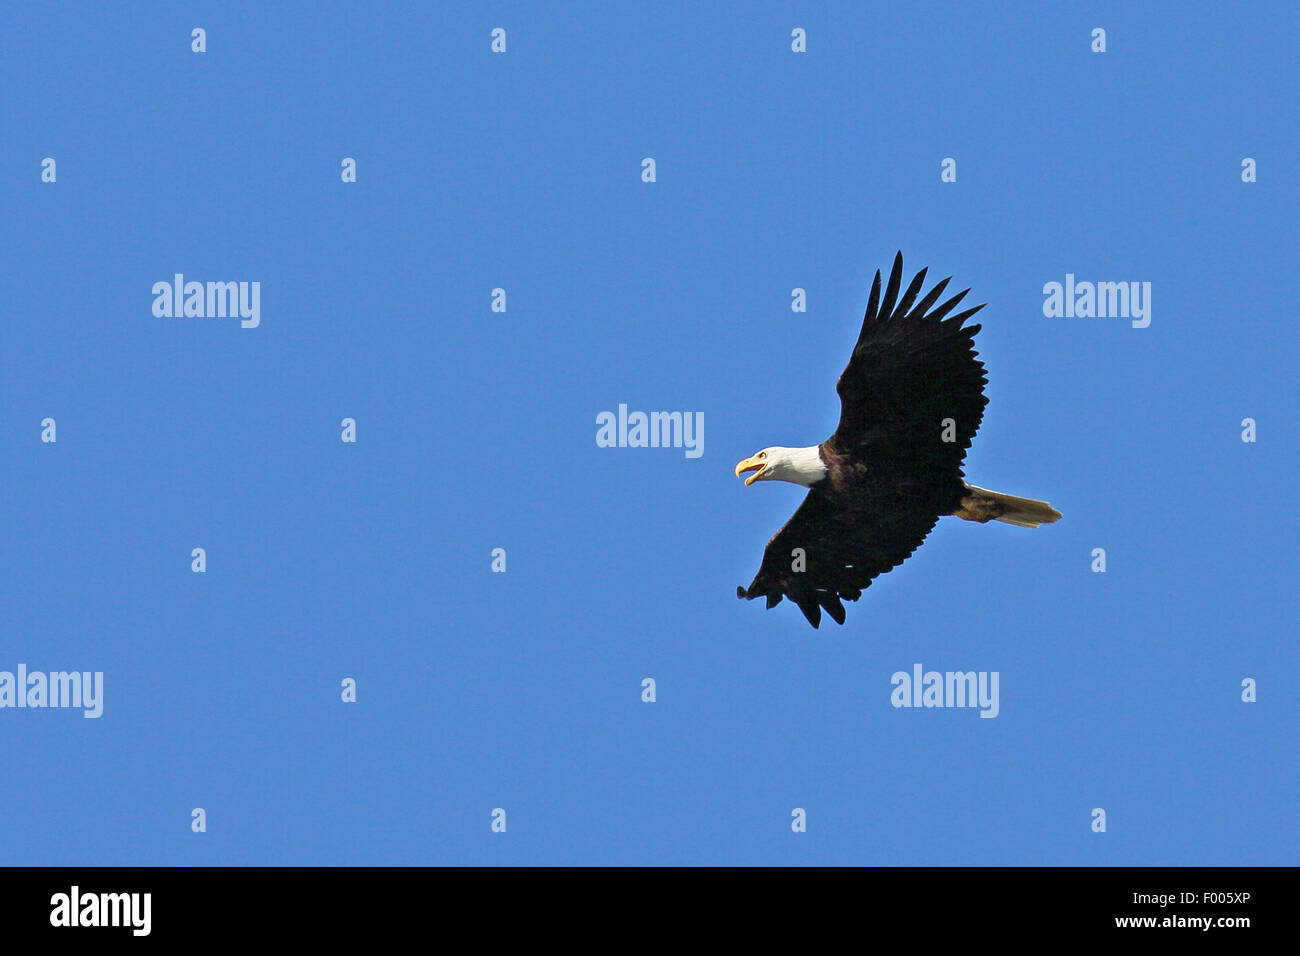 American bald eagle (Haliaeetus leucocephalus), flying at the blue sky and calling, Canada, Vancouver Island Stock Photo